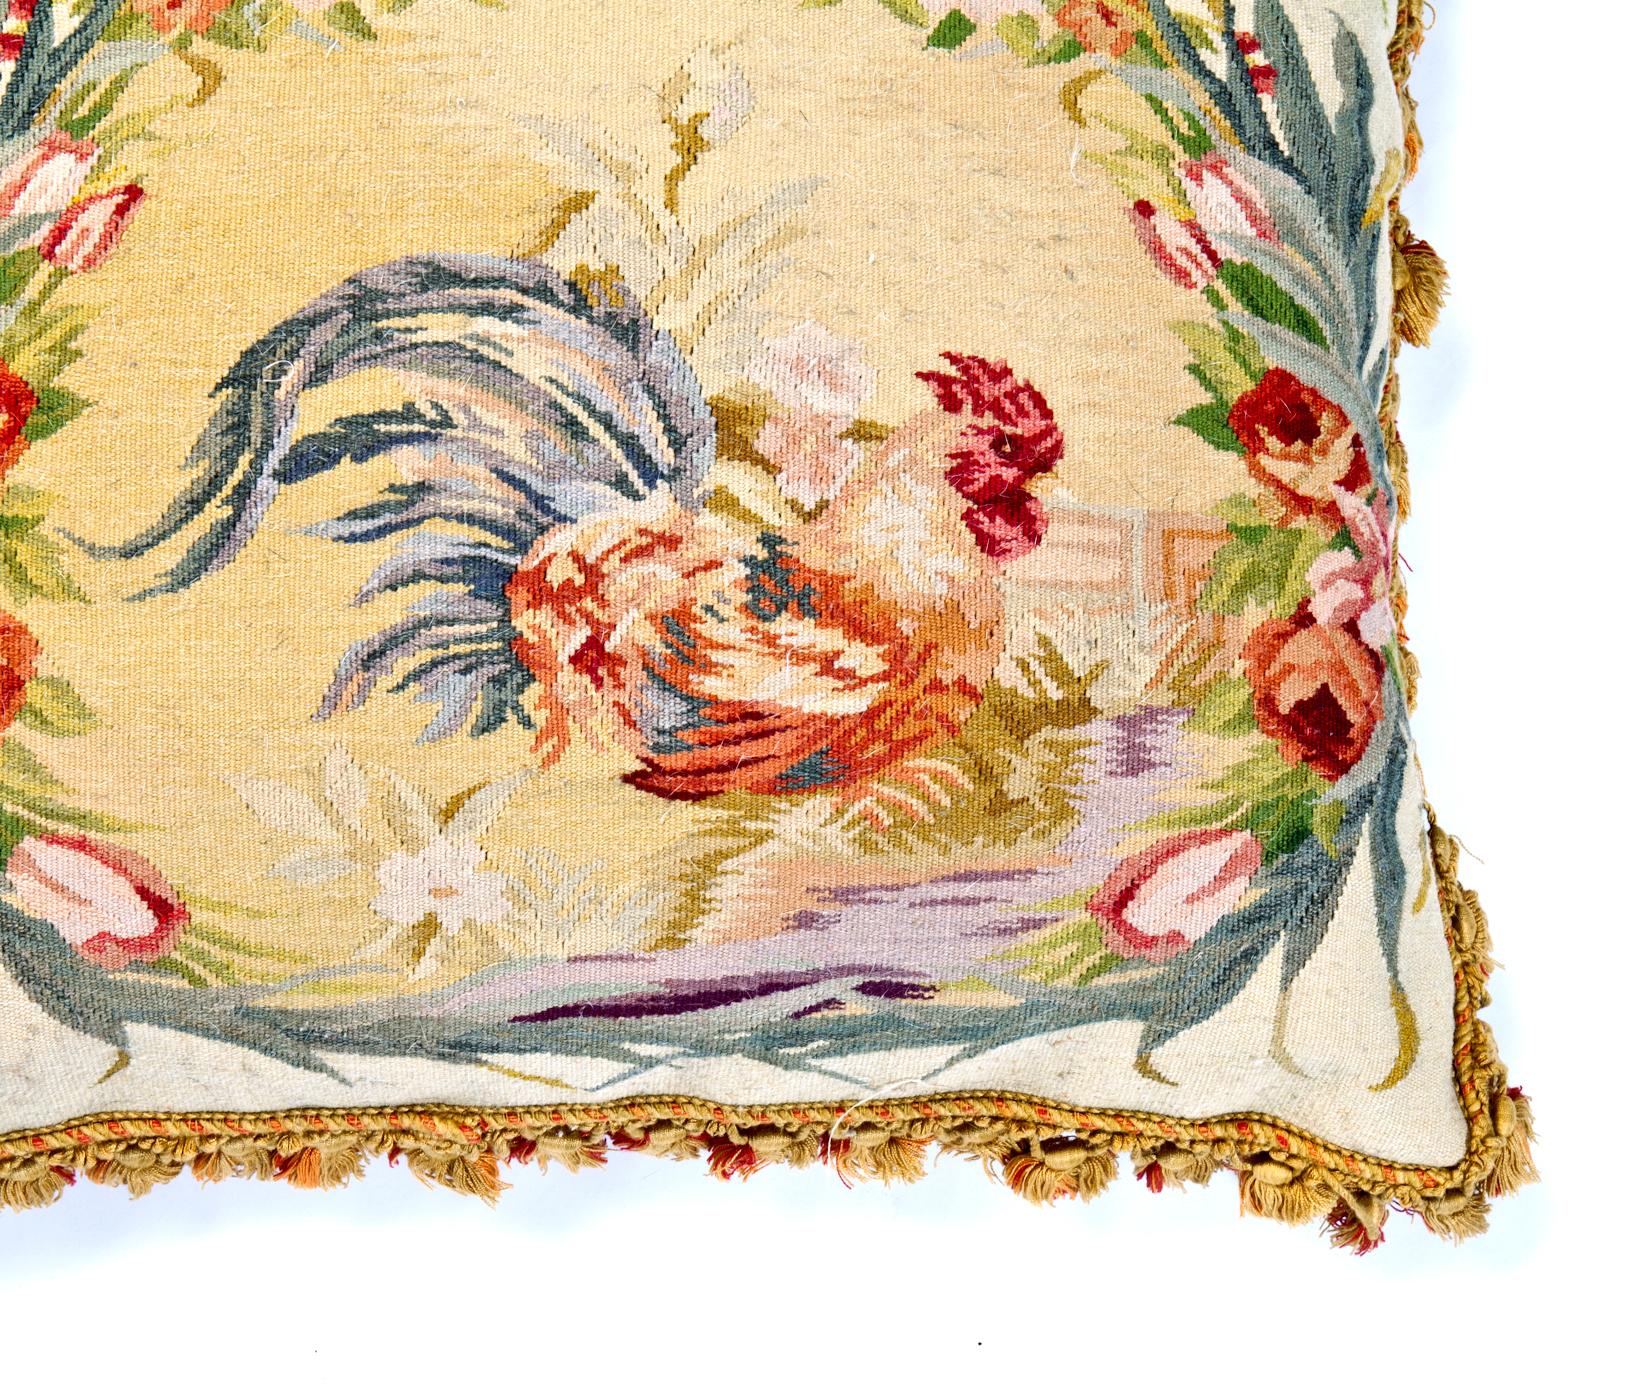 Handwoven French Aubusson tapestry pillow depicting rooster & flowers. Velvet back with zipper closure. Fringe trim. Feather & down insert; cotton interior cover. Some age to the velvet backing & fringe.